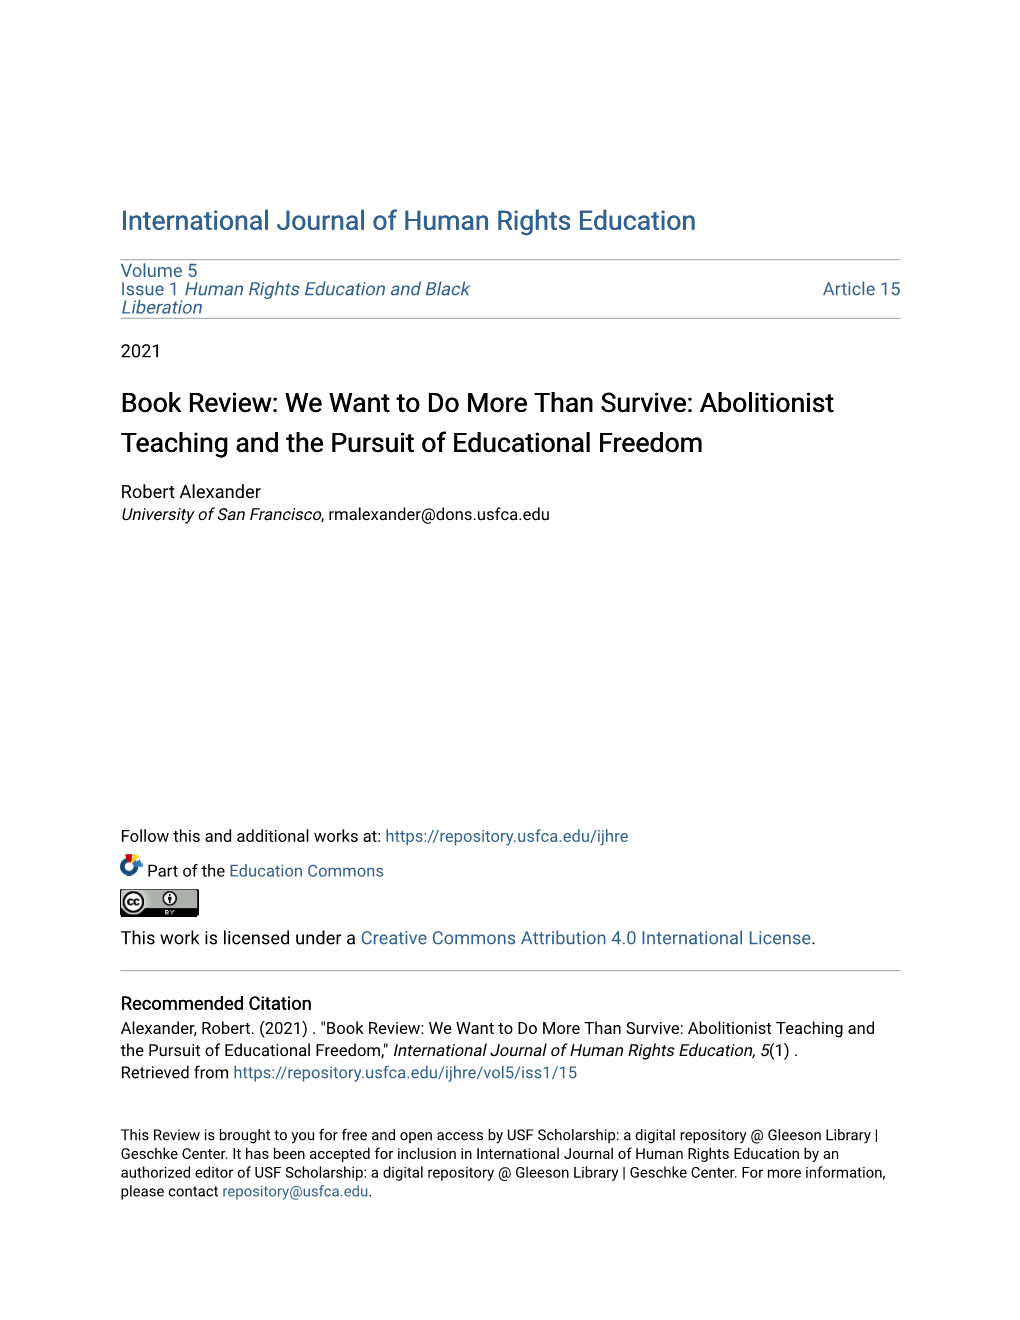 Book Review: We Want to Do More Than Survive: Abolitionist Teaching and the Pursuit of Educational Freedom